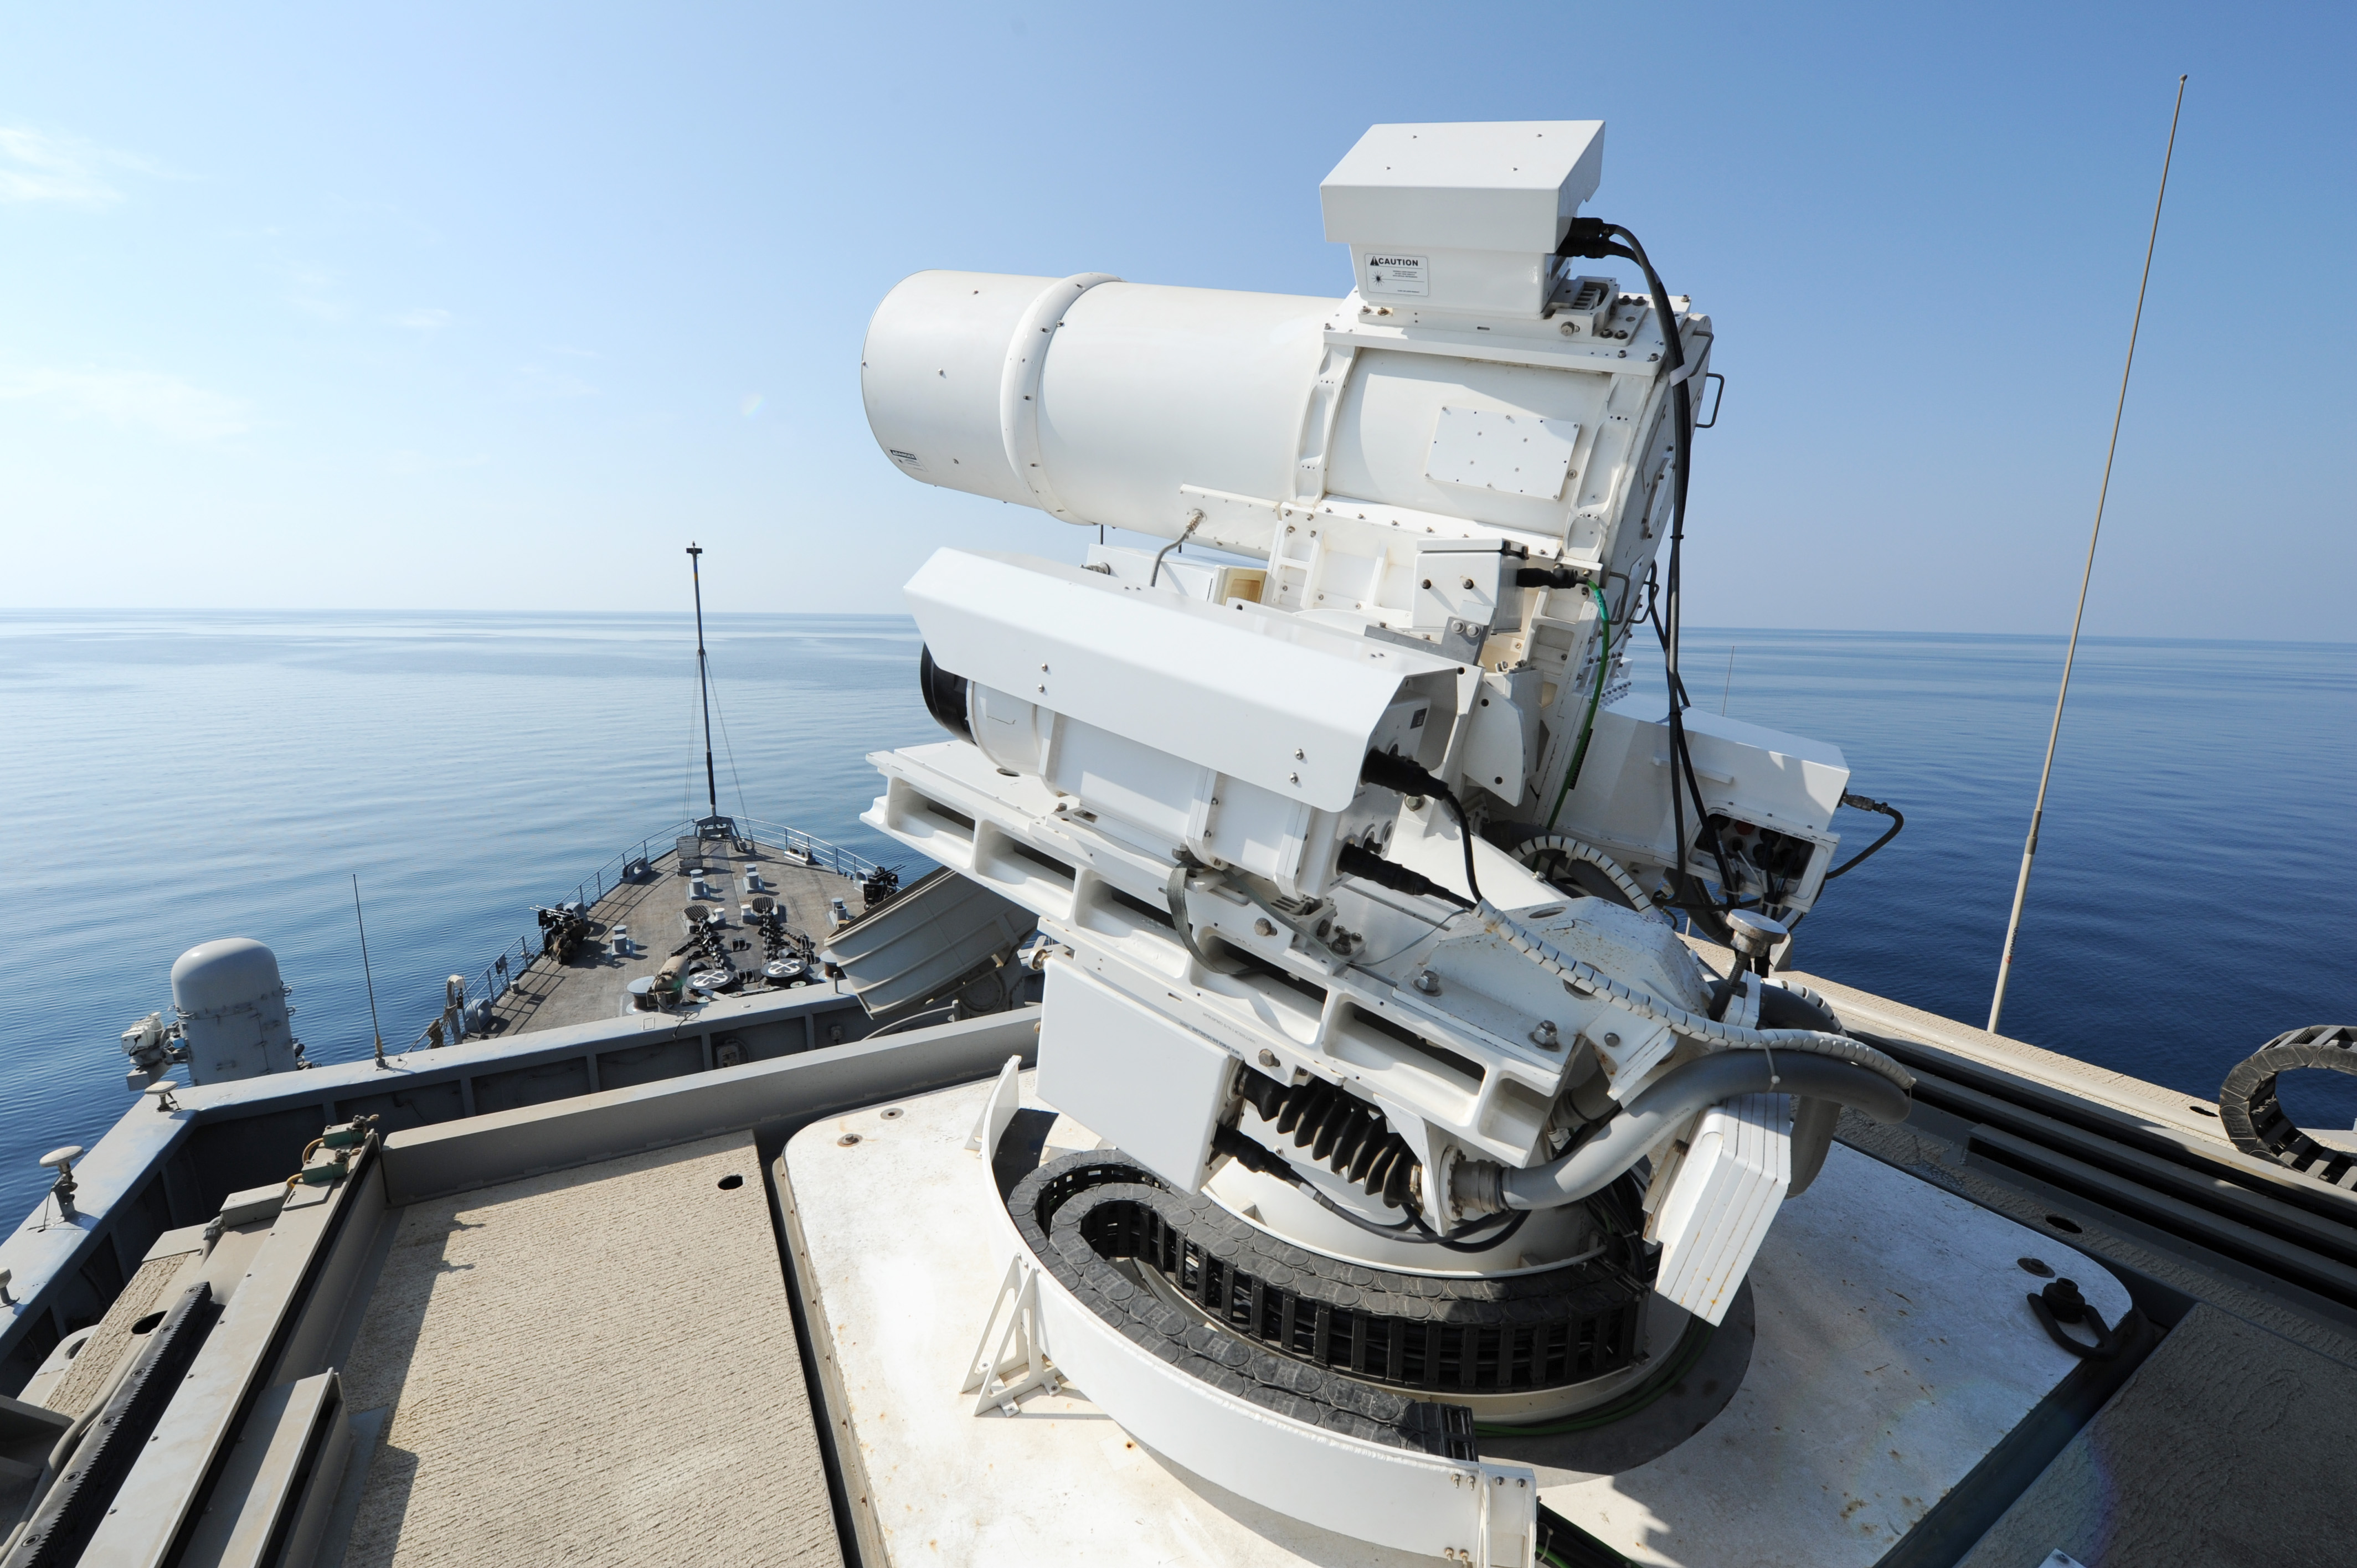 This US Navy photo shows the Afloat Forward Staging Base (Interim) USS Ponce (ASB(I) 15) on November 17, 2014 as it conducts an operational demonstration of the Office of Naval Research (ONR)-sponsored Laser Weapon System (LaWS) while deployed to the Gulf. AFP PHOTO/US NAVY/JOHN F. WILLIAMS/HANDOUT =  RESTRICTED TO EDITORIAL USE / MANDATORY CREDIT: "AFP PHOTO HANDOUT-US NAVY/JOHN F. WILLIAMS"/ NO MARKETING - NO ADVERTISING CAMPAIGNS/  NO A LA CARTE SALES / DISTRIBUTED AS A SERVICE TO CLIENTS /  =  / AFP PHOTO / Navy Media Content Services / John F. Williams